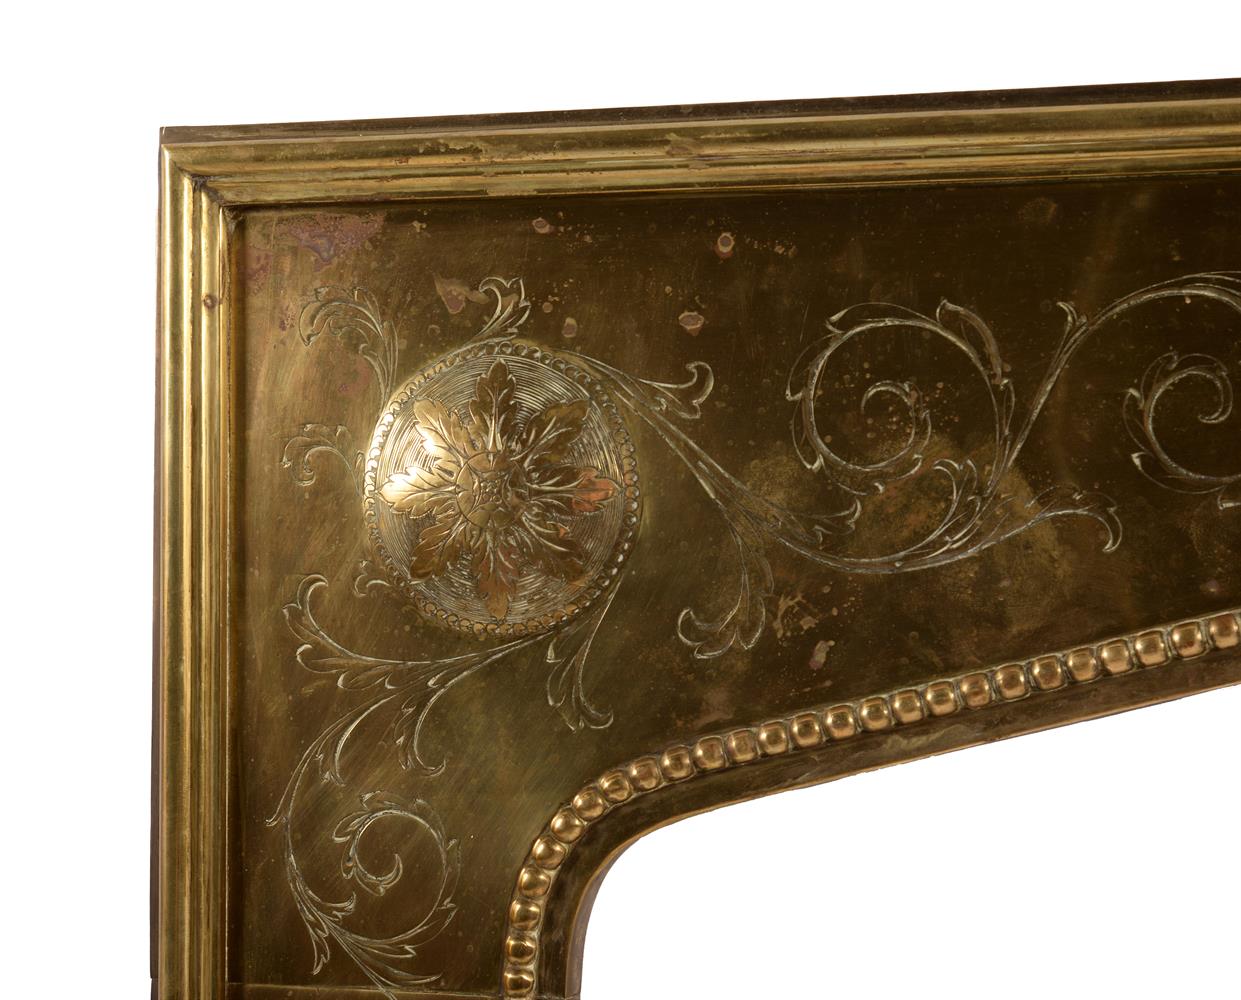 A GEORGE III BRASS FIRE SURROUND, POSSIBLY DUBLIN, LATE 18TH CENTURY - Image 3 of 3